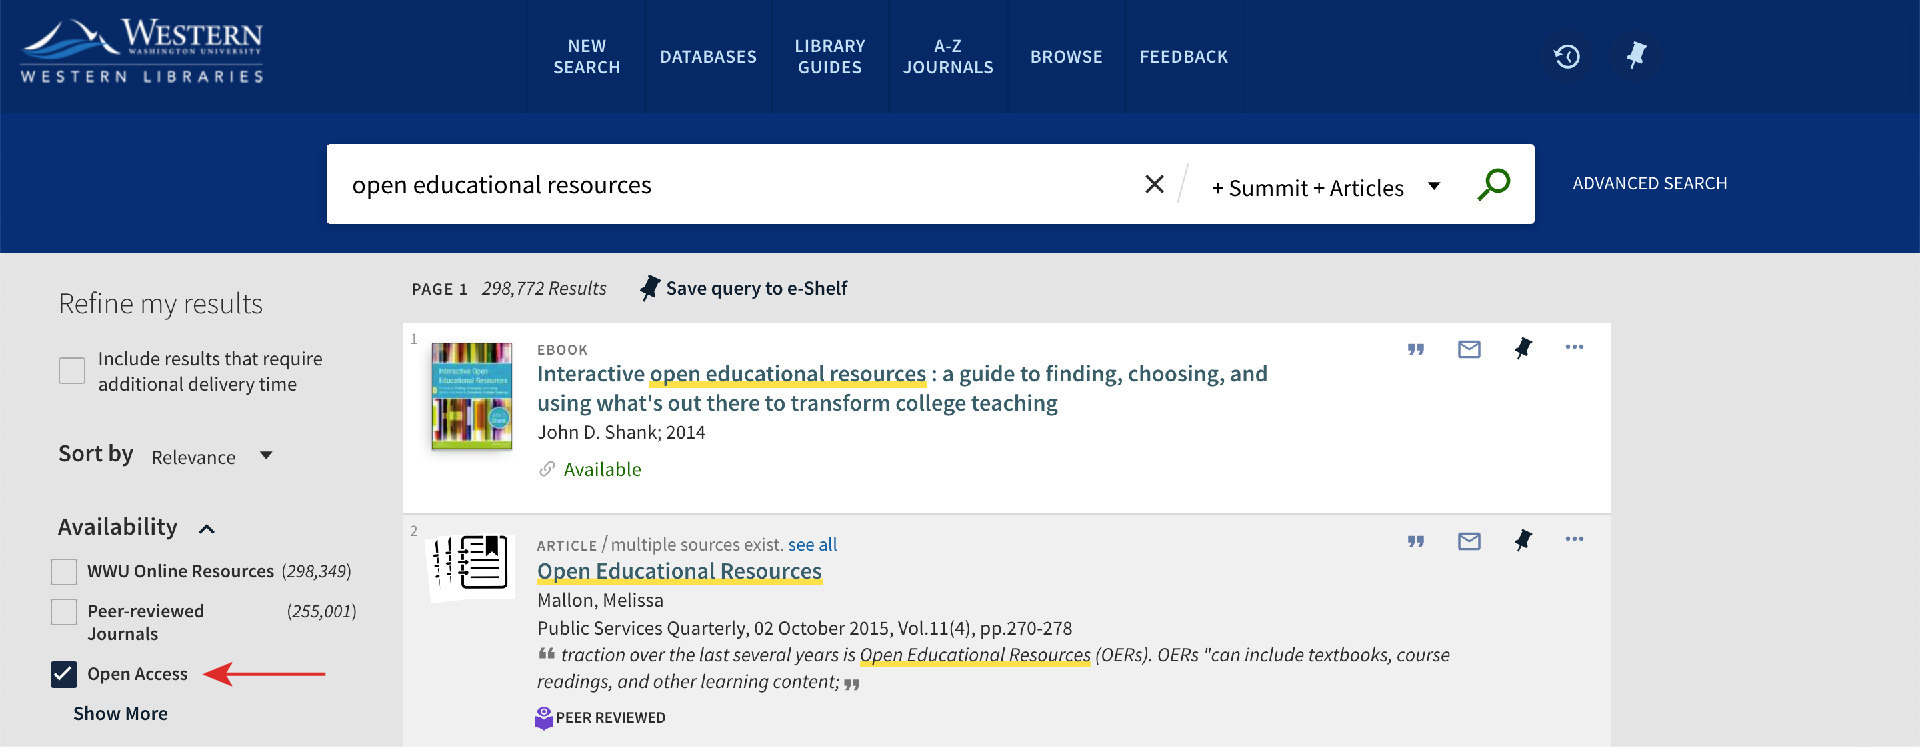 Screenshot of Western Libraries search results, with the "Open Access" checkbox on the left side of the page highlighted.